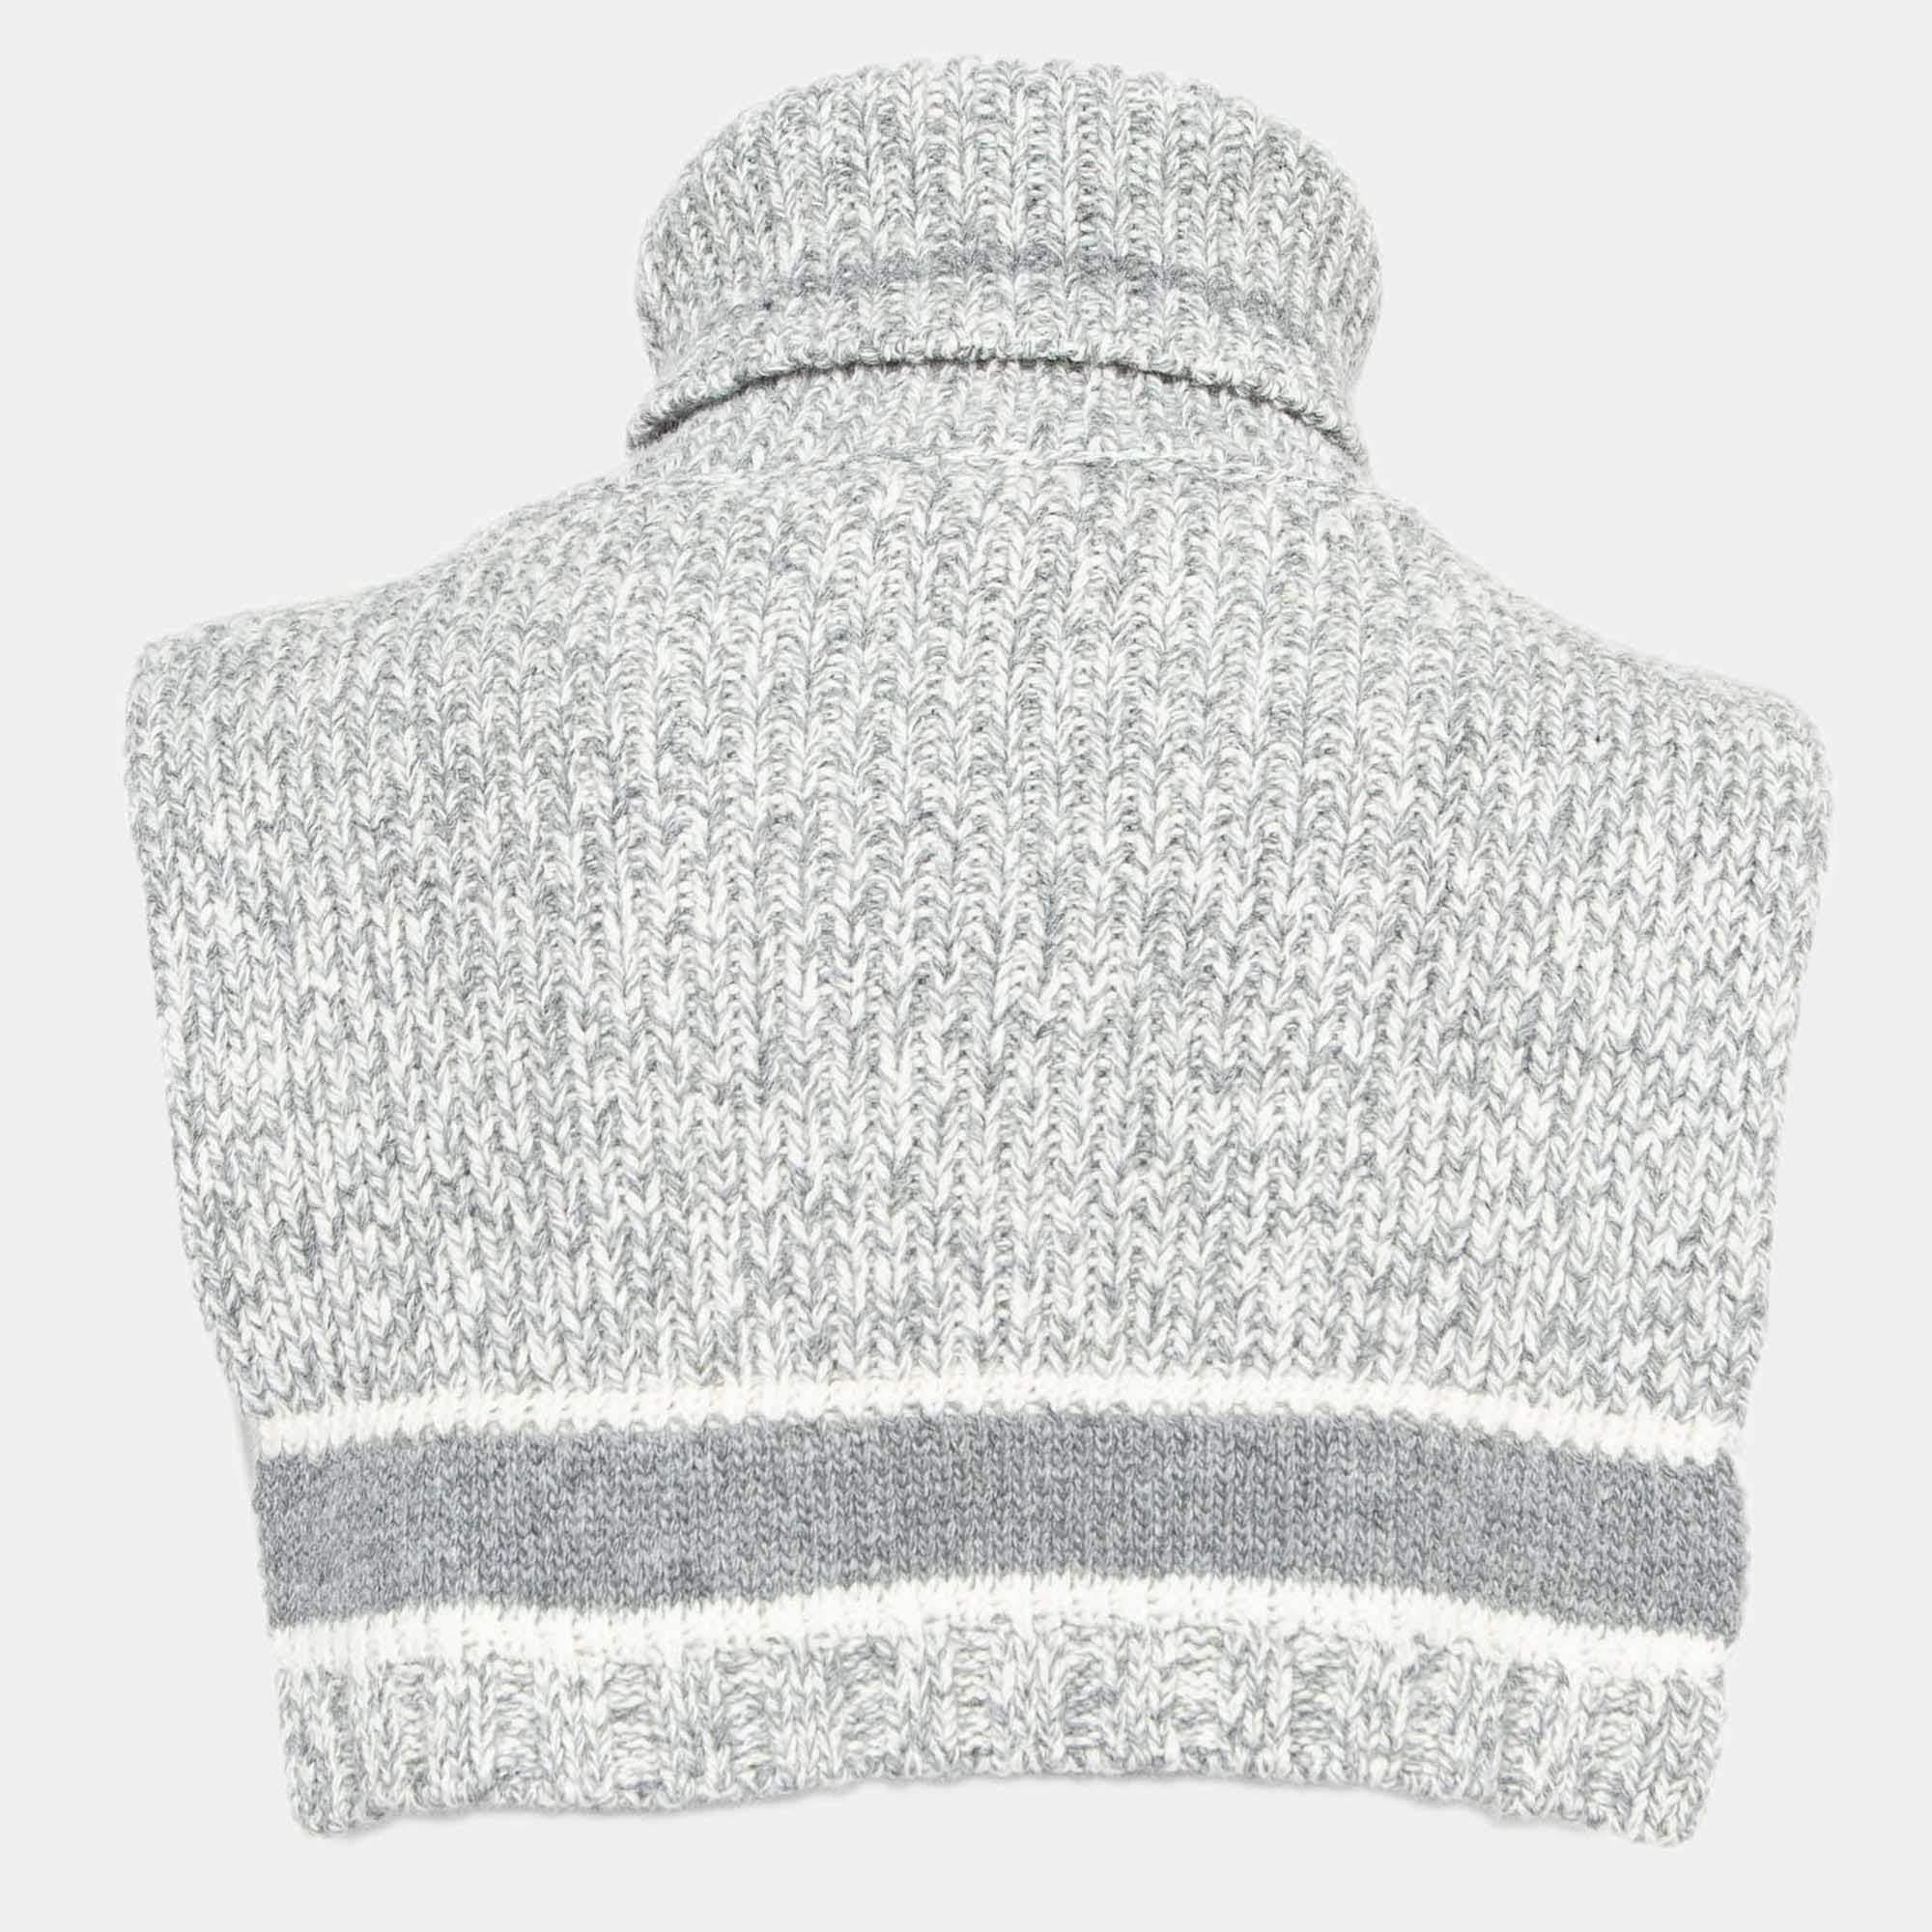 Embrace luxury with the Dior neck warmer. Crafted with meticulous attention to detail, this accessory exudes understated refinement. The iconic Dior logo subtly integrated into the ribbed knit design adds a touch of timeless elegance to your winter